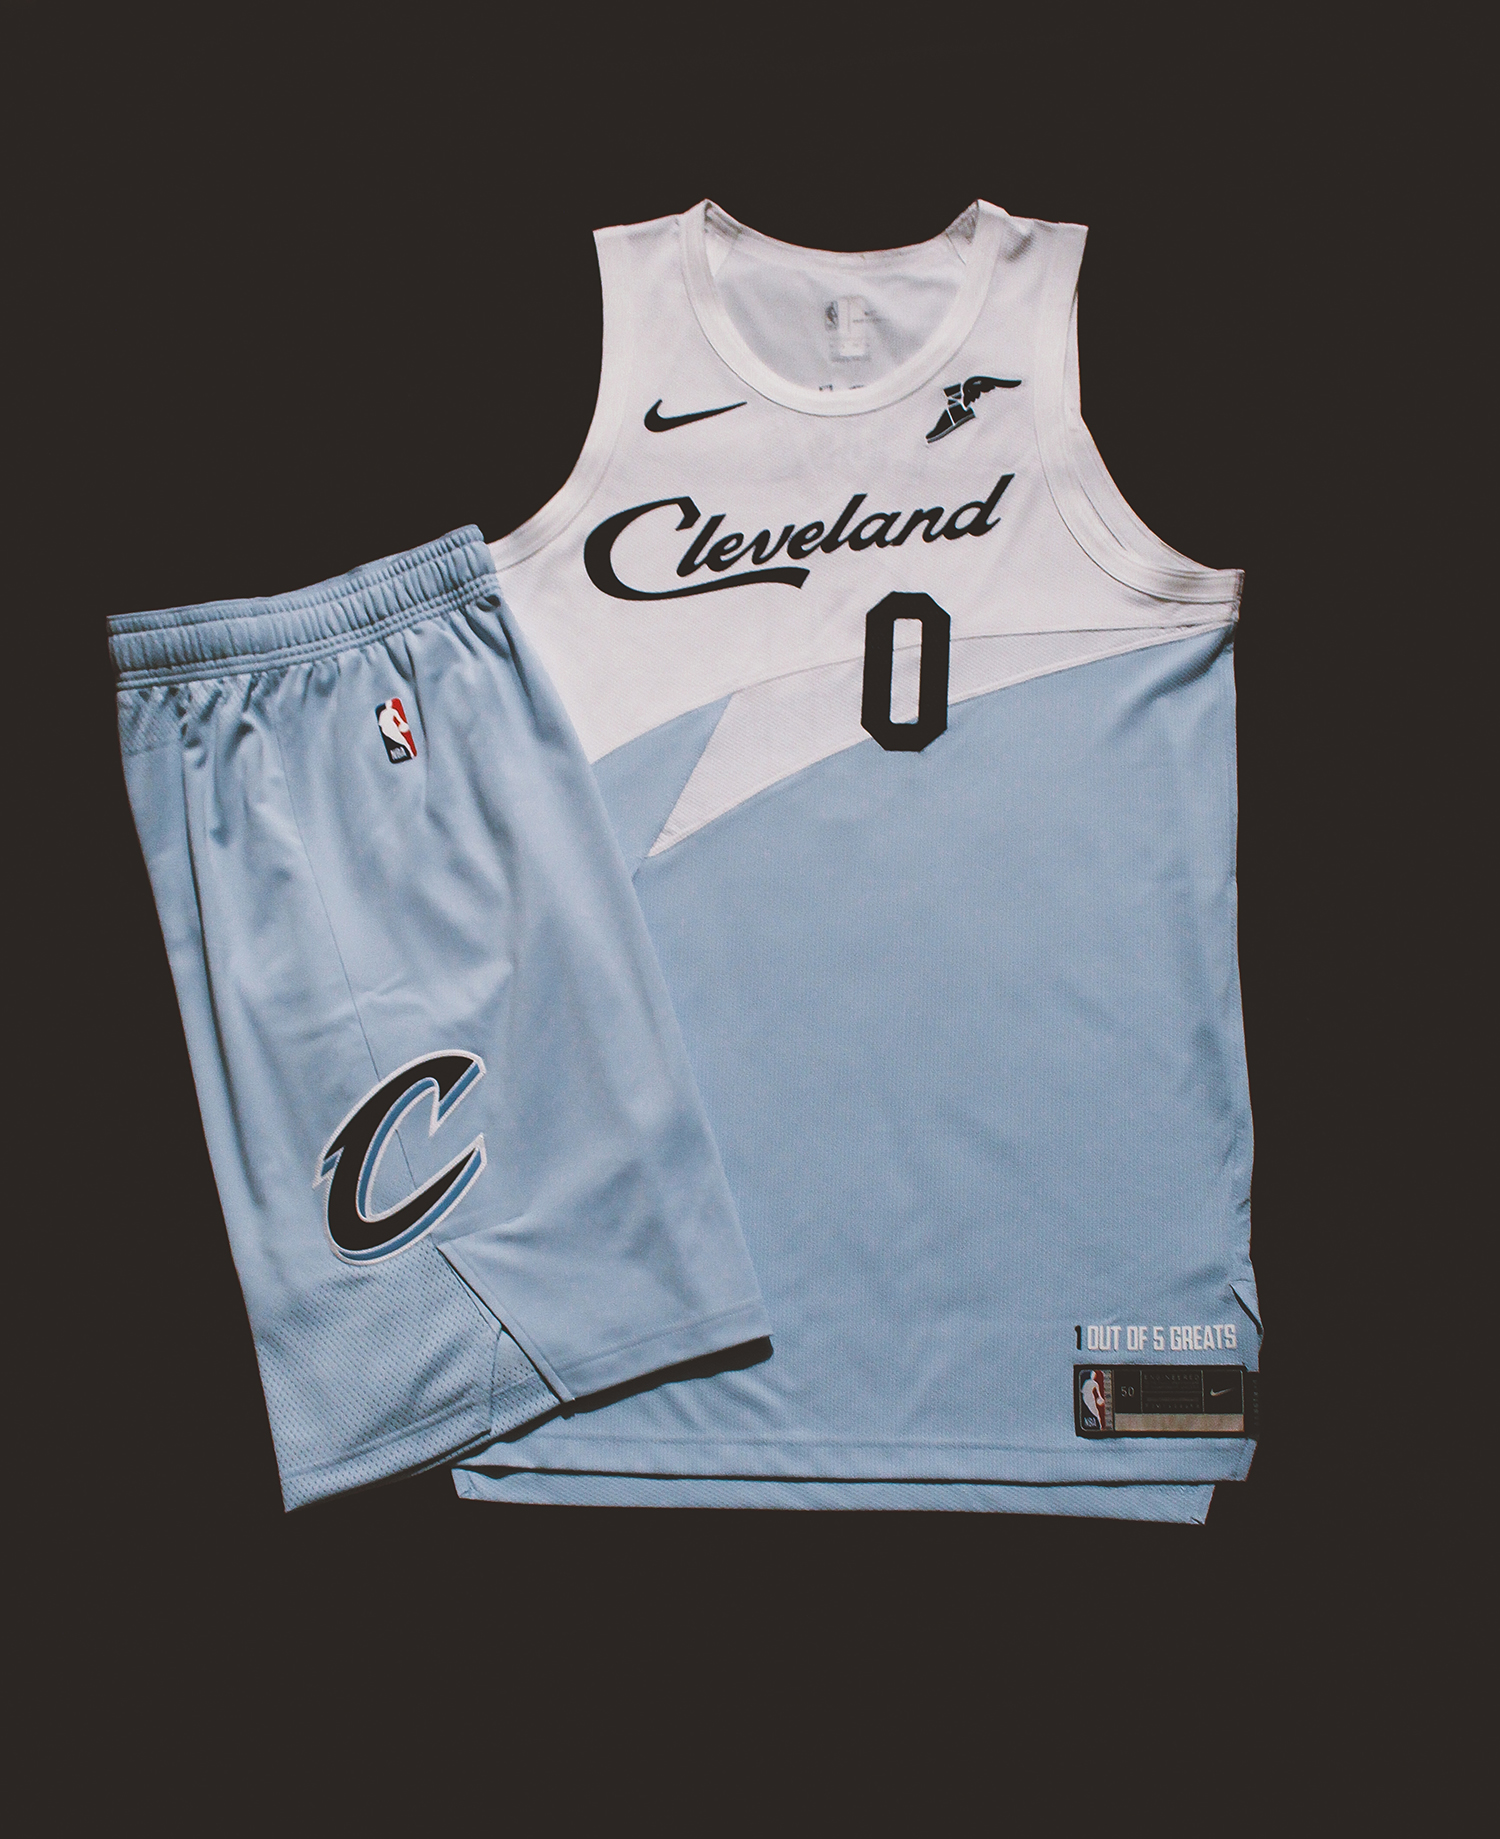 Cleveland Cavaliers unveil new uniform earned with 2018 playoff appearance  (photos)